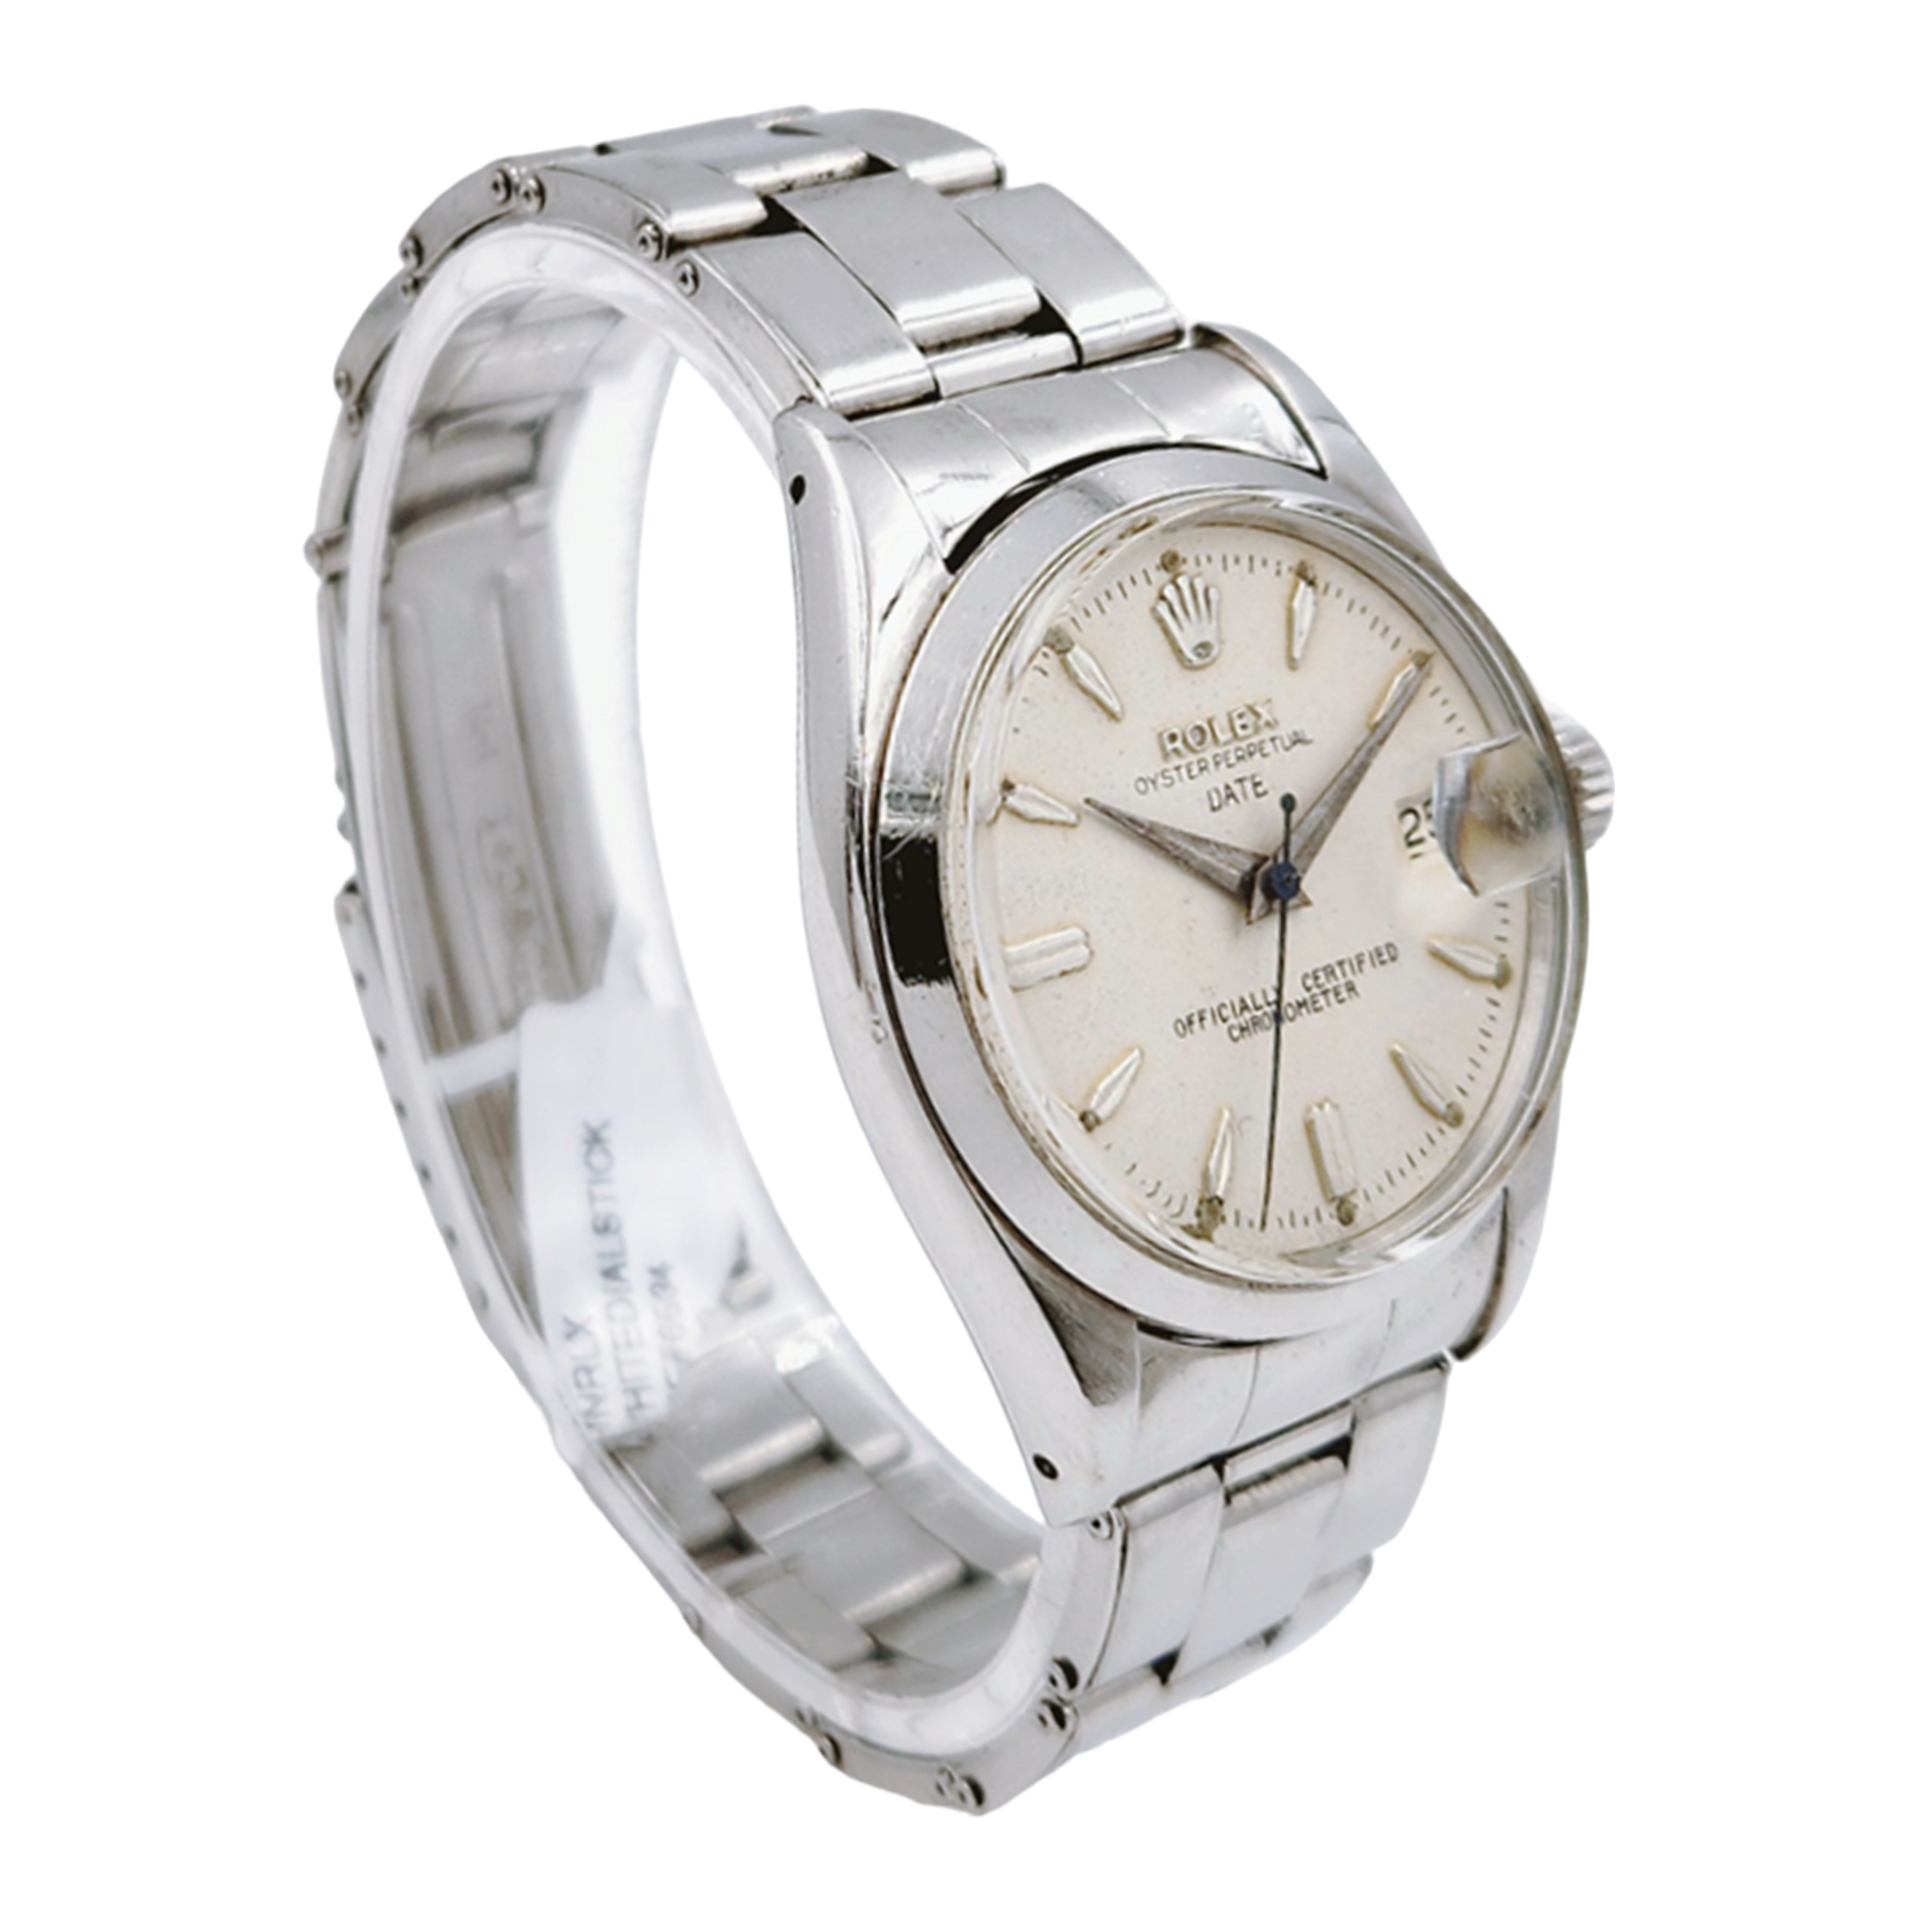 1976 Men's Rolex 34mm Date Vintage Stainless Steel Wristwatch w/ Cream Dial & Smooth Bezel. (Pre-Owned 6534)